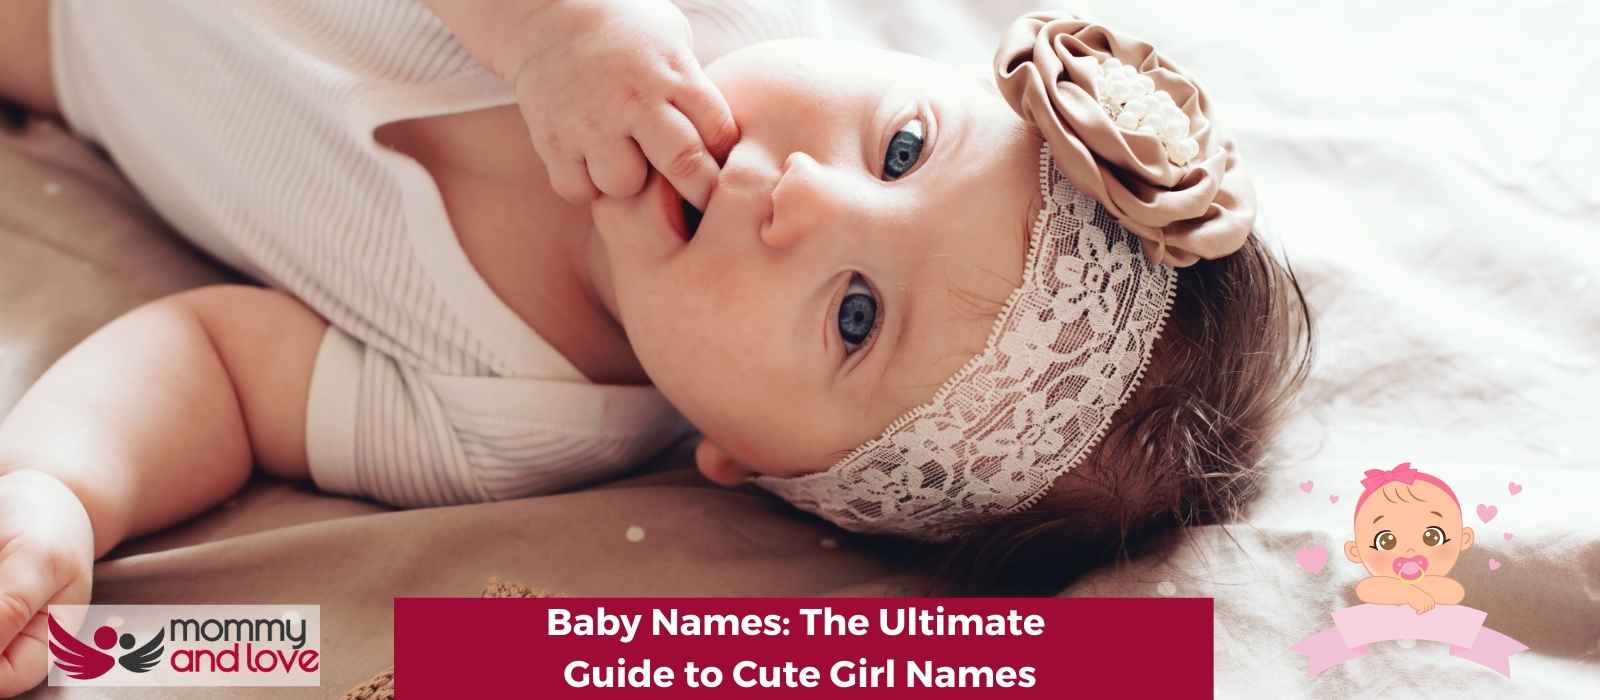 Baby Names The Ultimate Guide to Cute Girl Names